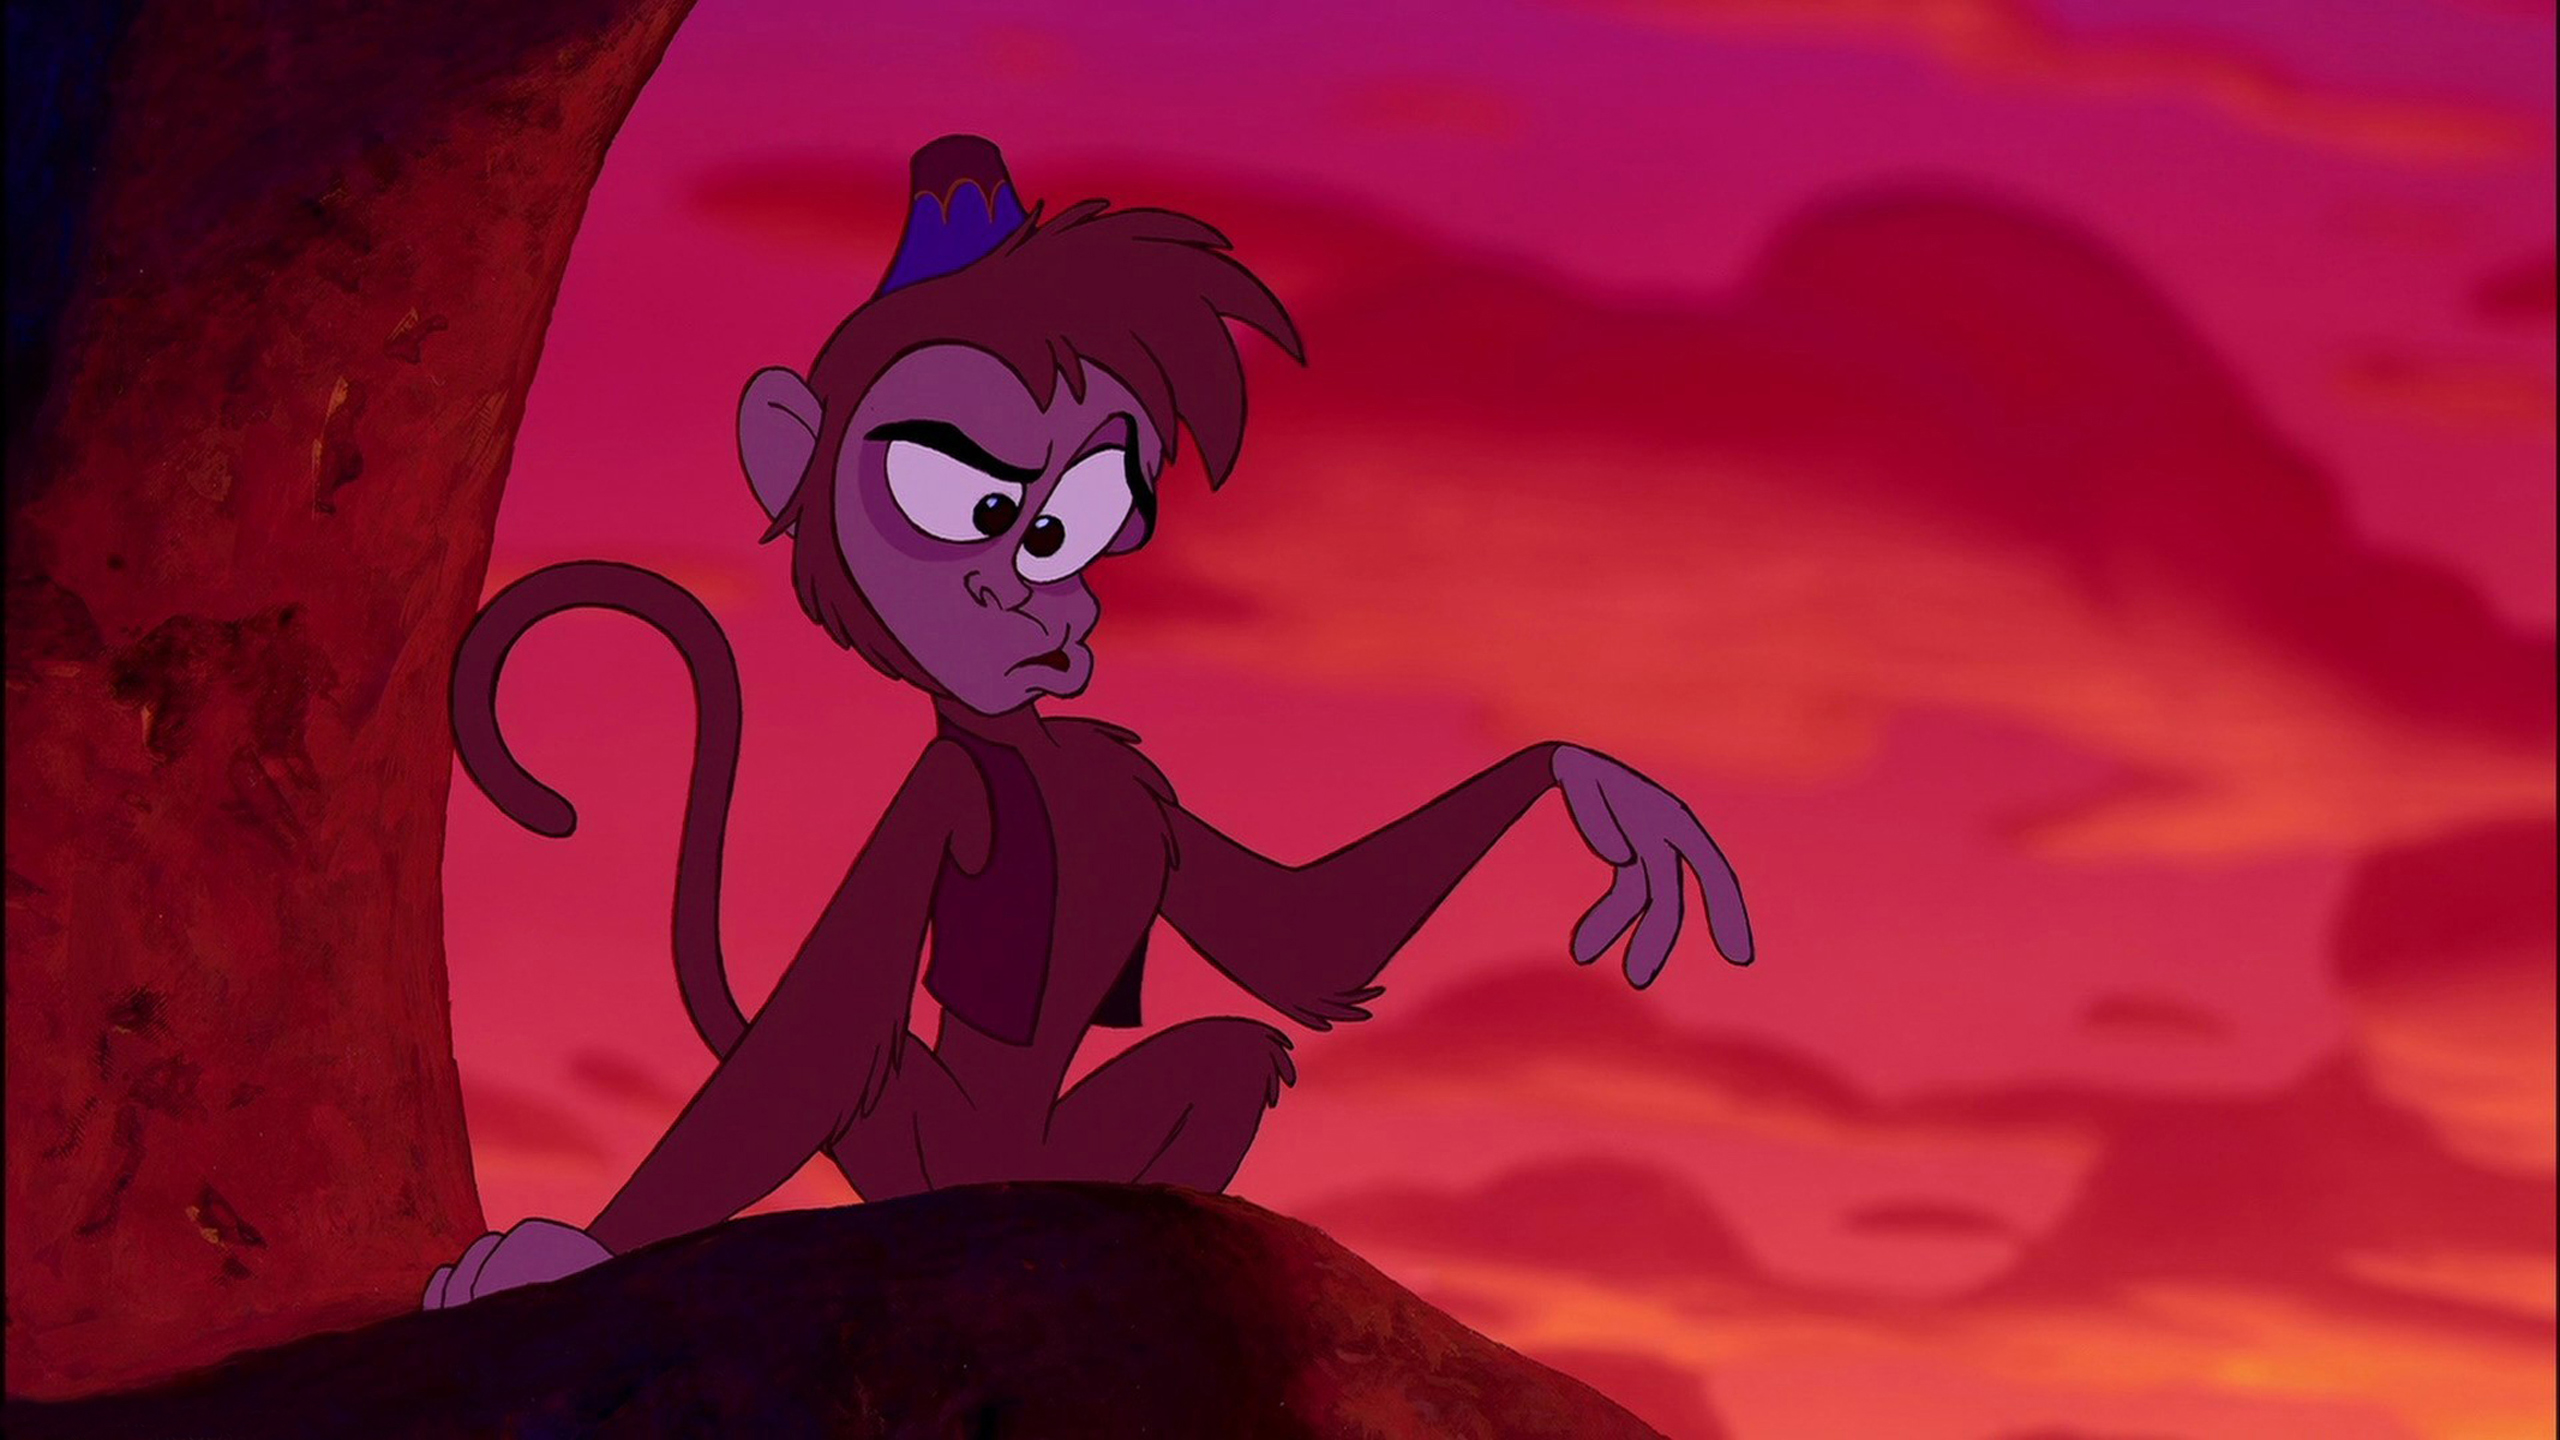 Abu Monkey Character From The Cartoon Aladdin And The Magic Lamp